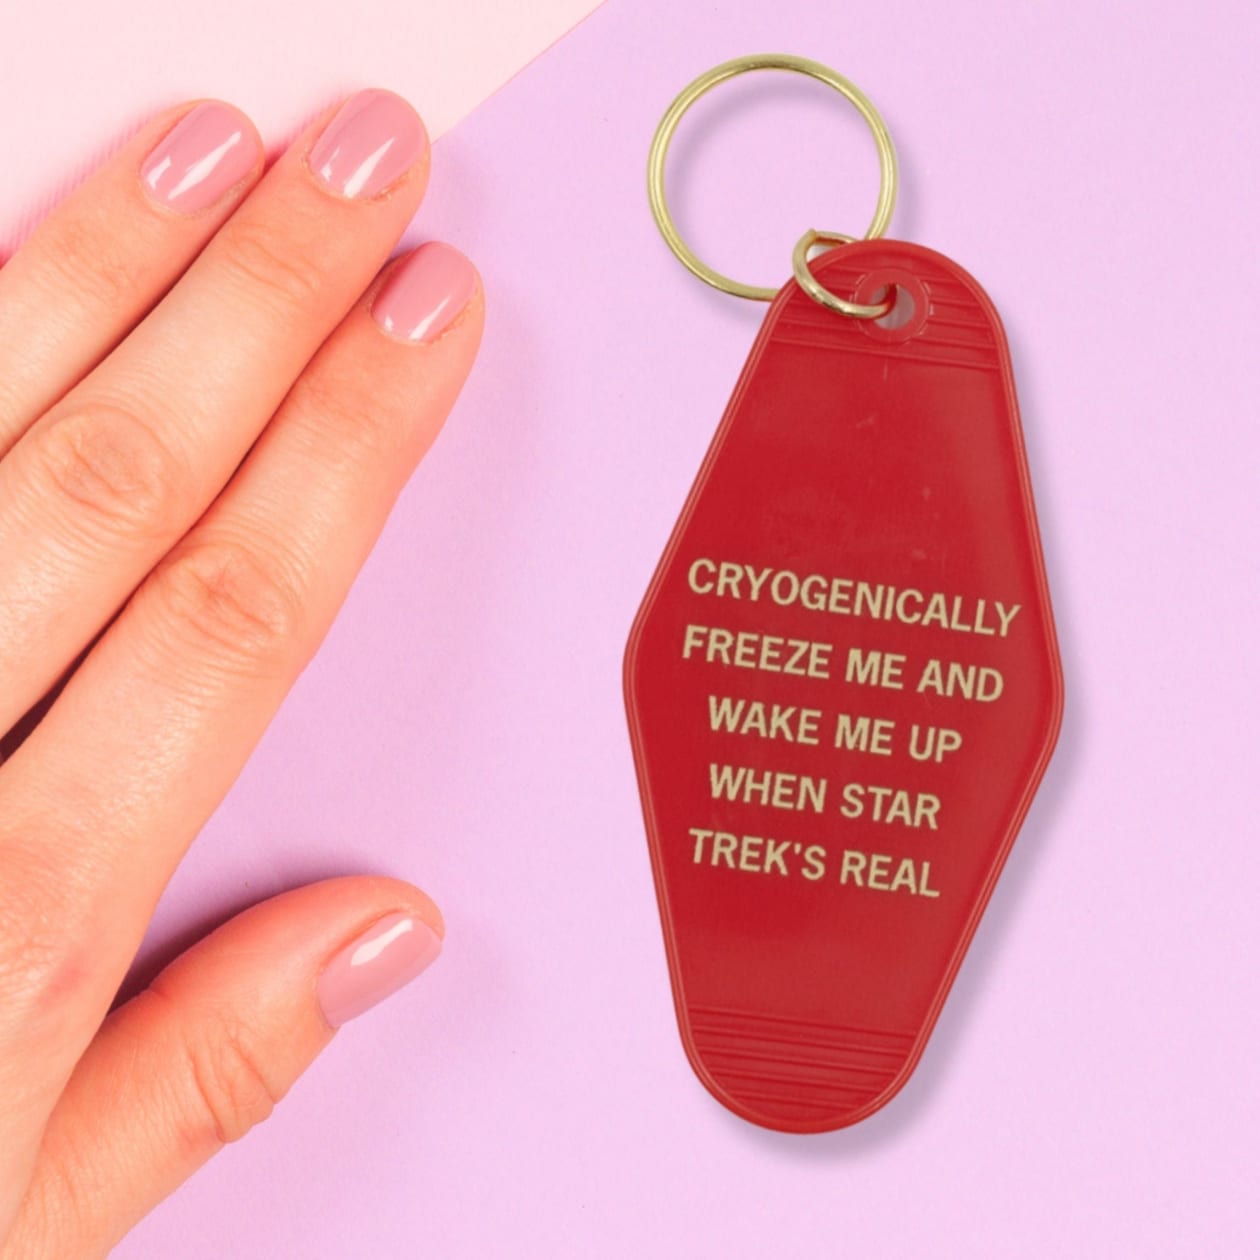 Cryogenically Freeze Me and Wake Me When Star Trek's Real Motel Style Keychain in Red and Gold